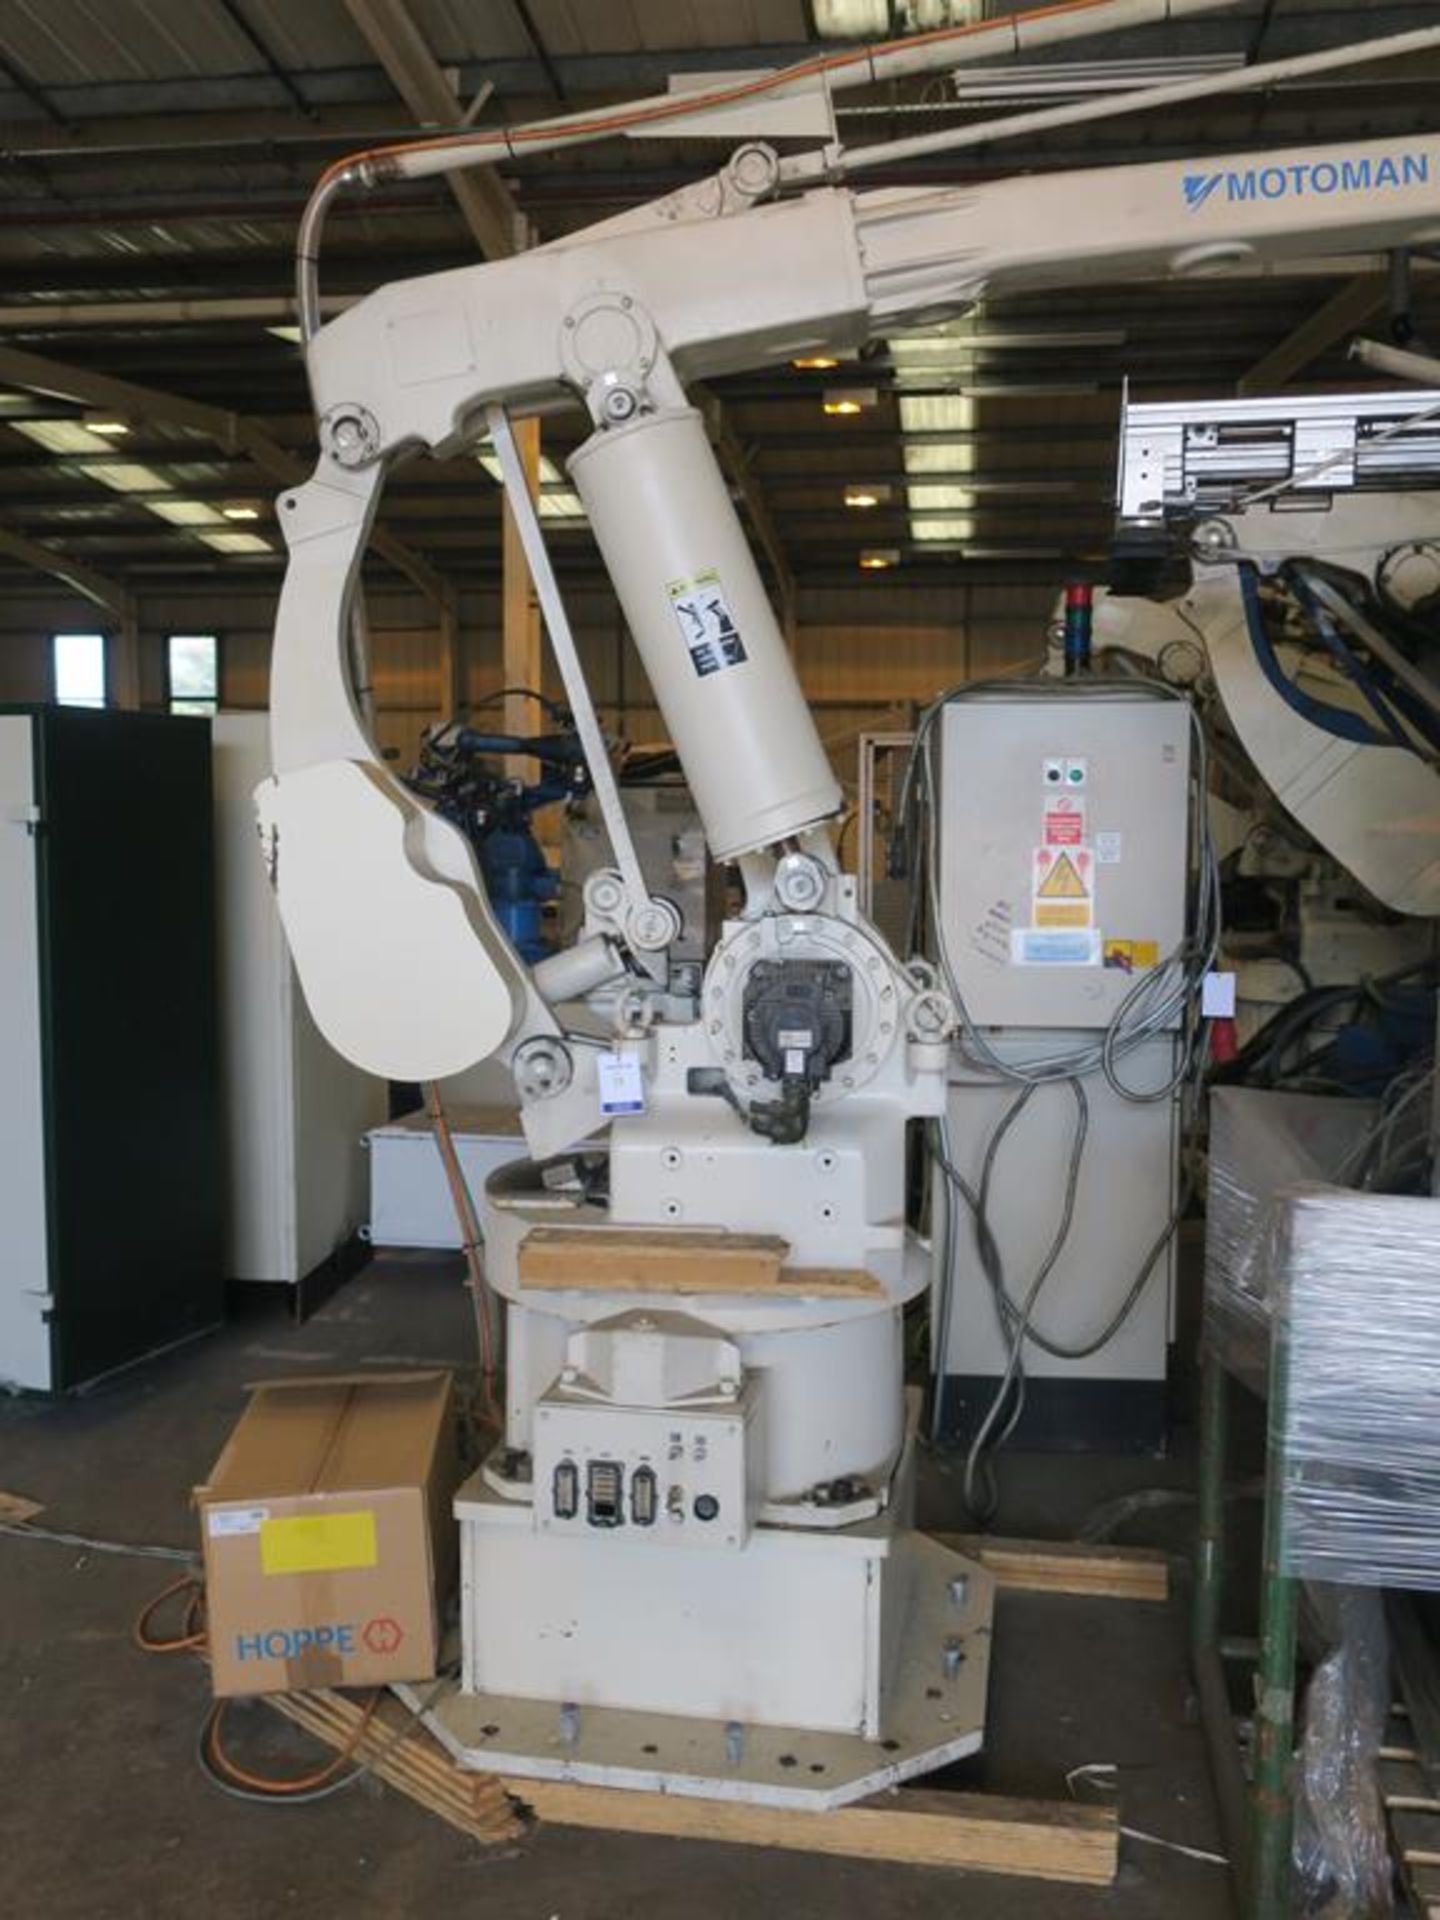 * 2003 Motoman Type Yr-Sp100 J11 Pick & Place Robot With Adjustable Panel Lifting Attachment; - Image 2 of 8